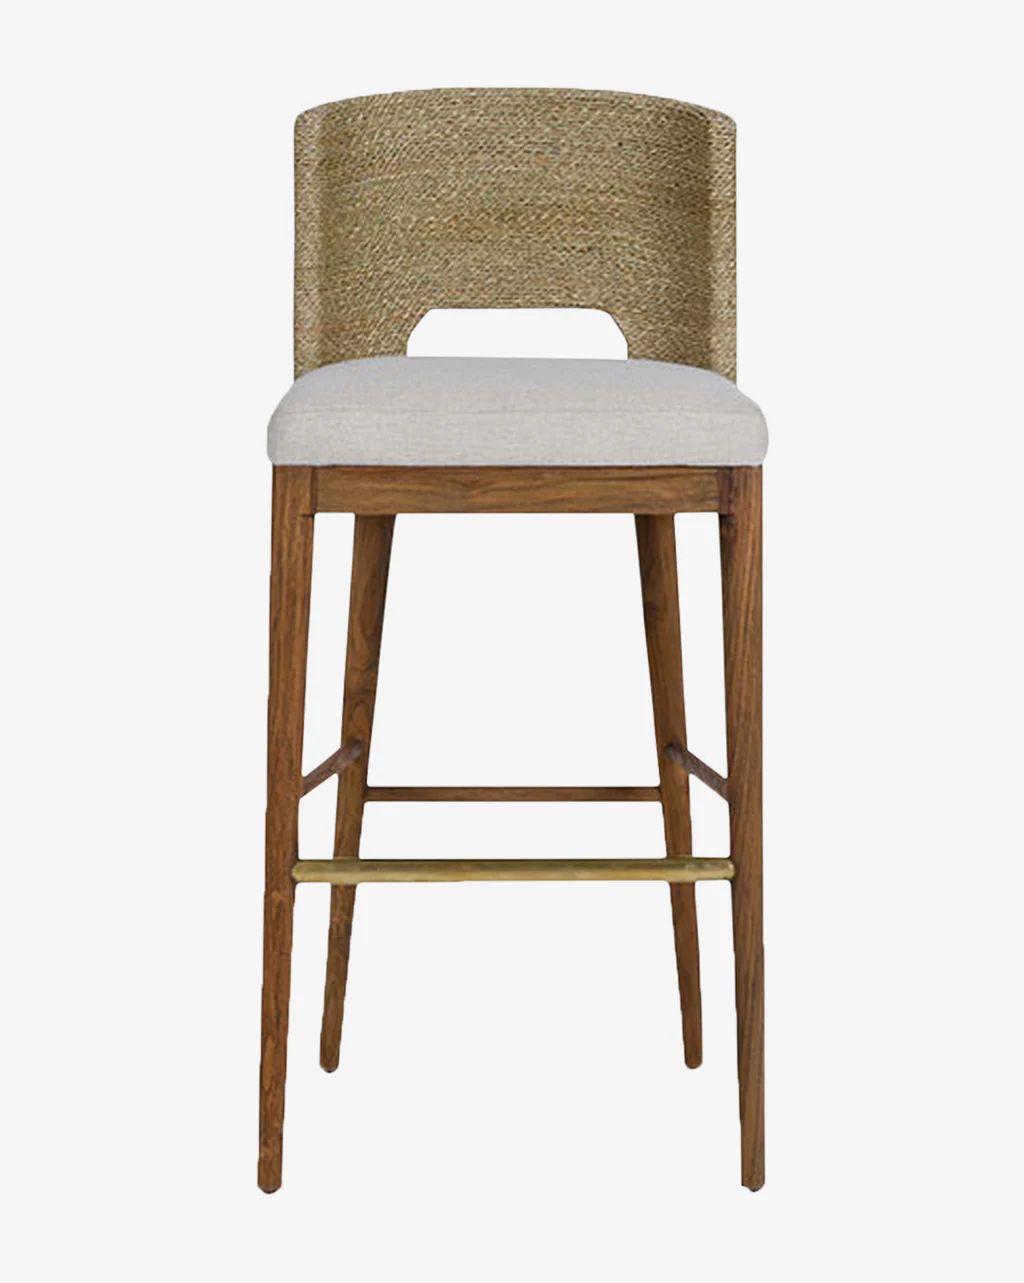 Ava Seagrass Counter Stool | McGee & Co. (US)